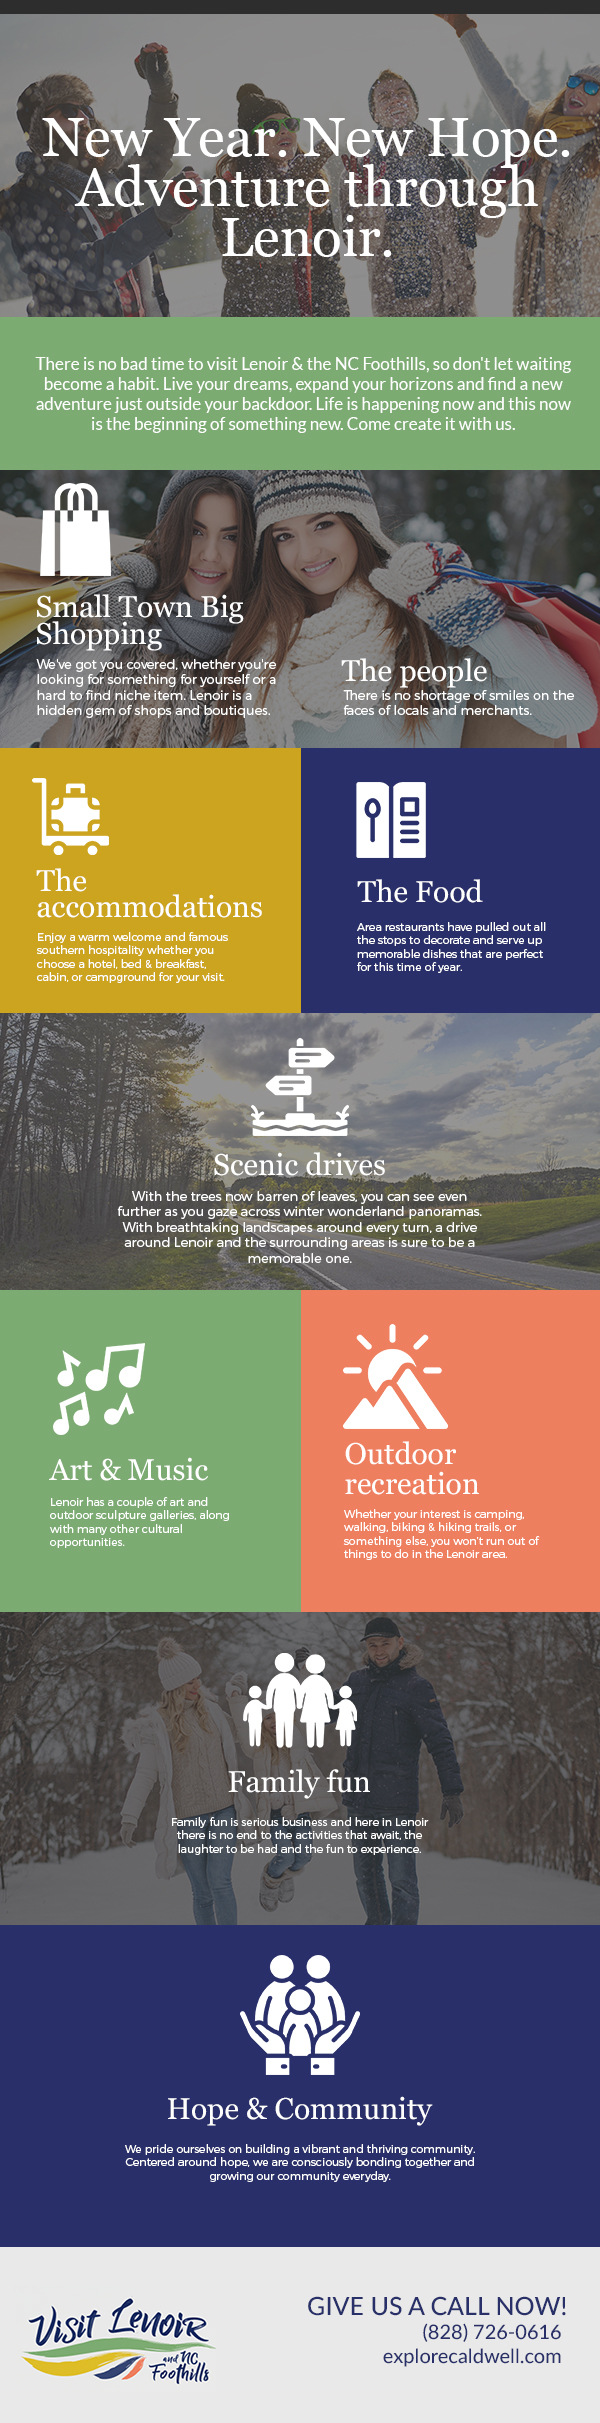 10 Reasons to Visit Lenoir for the Holidays [infographic]